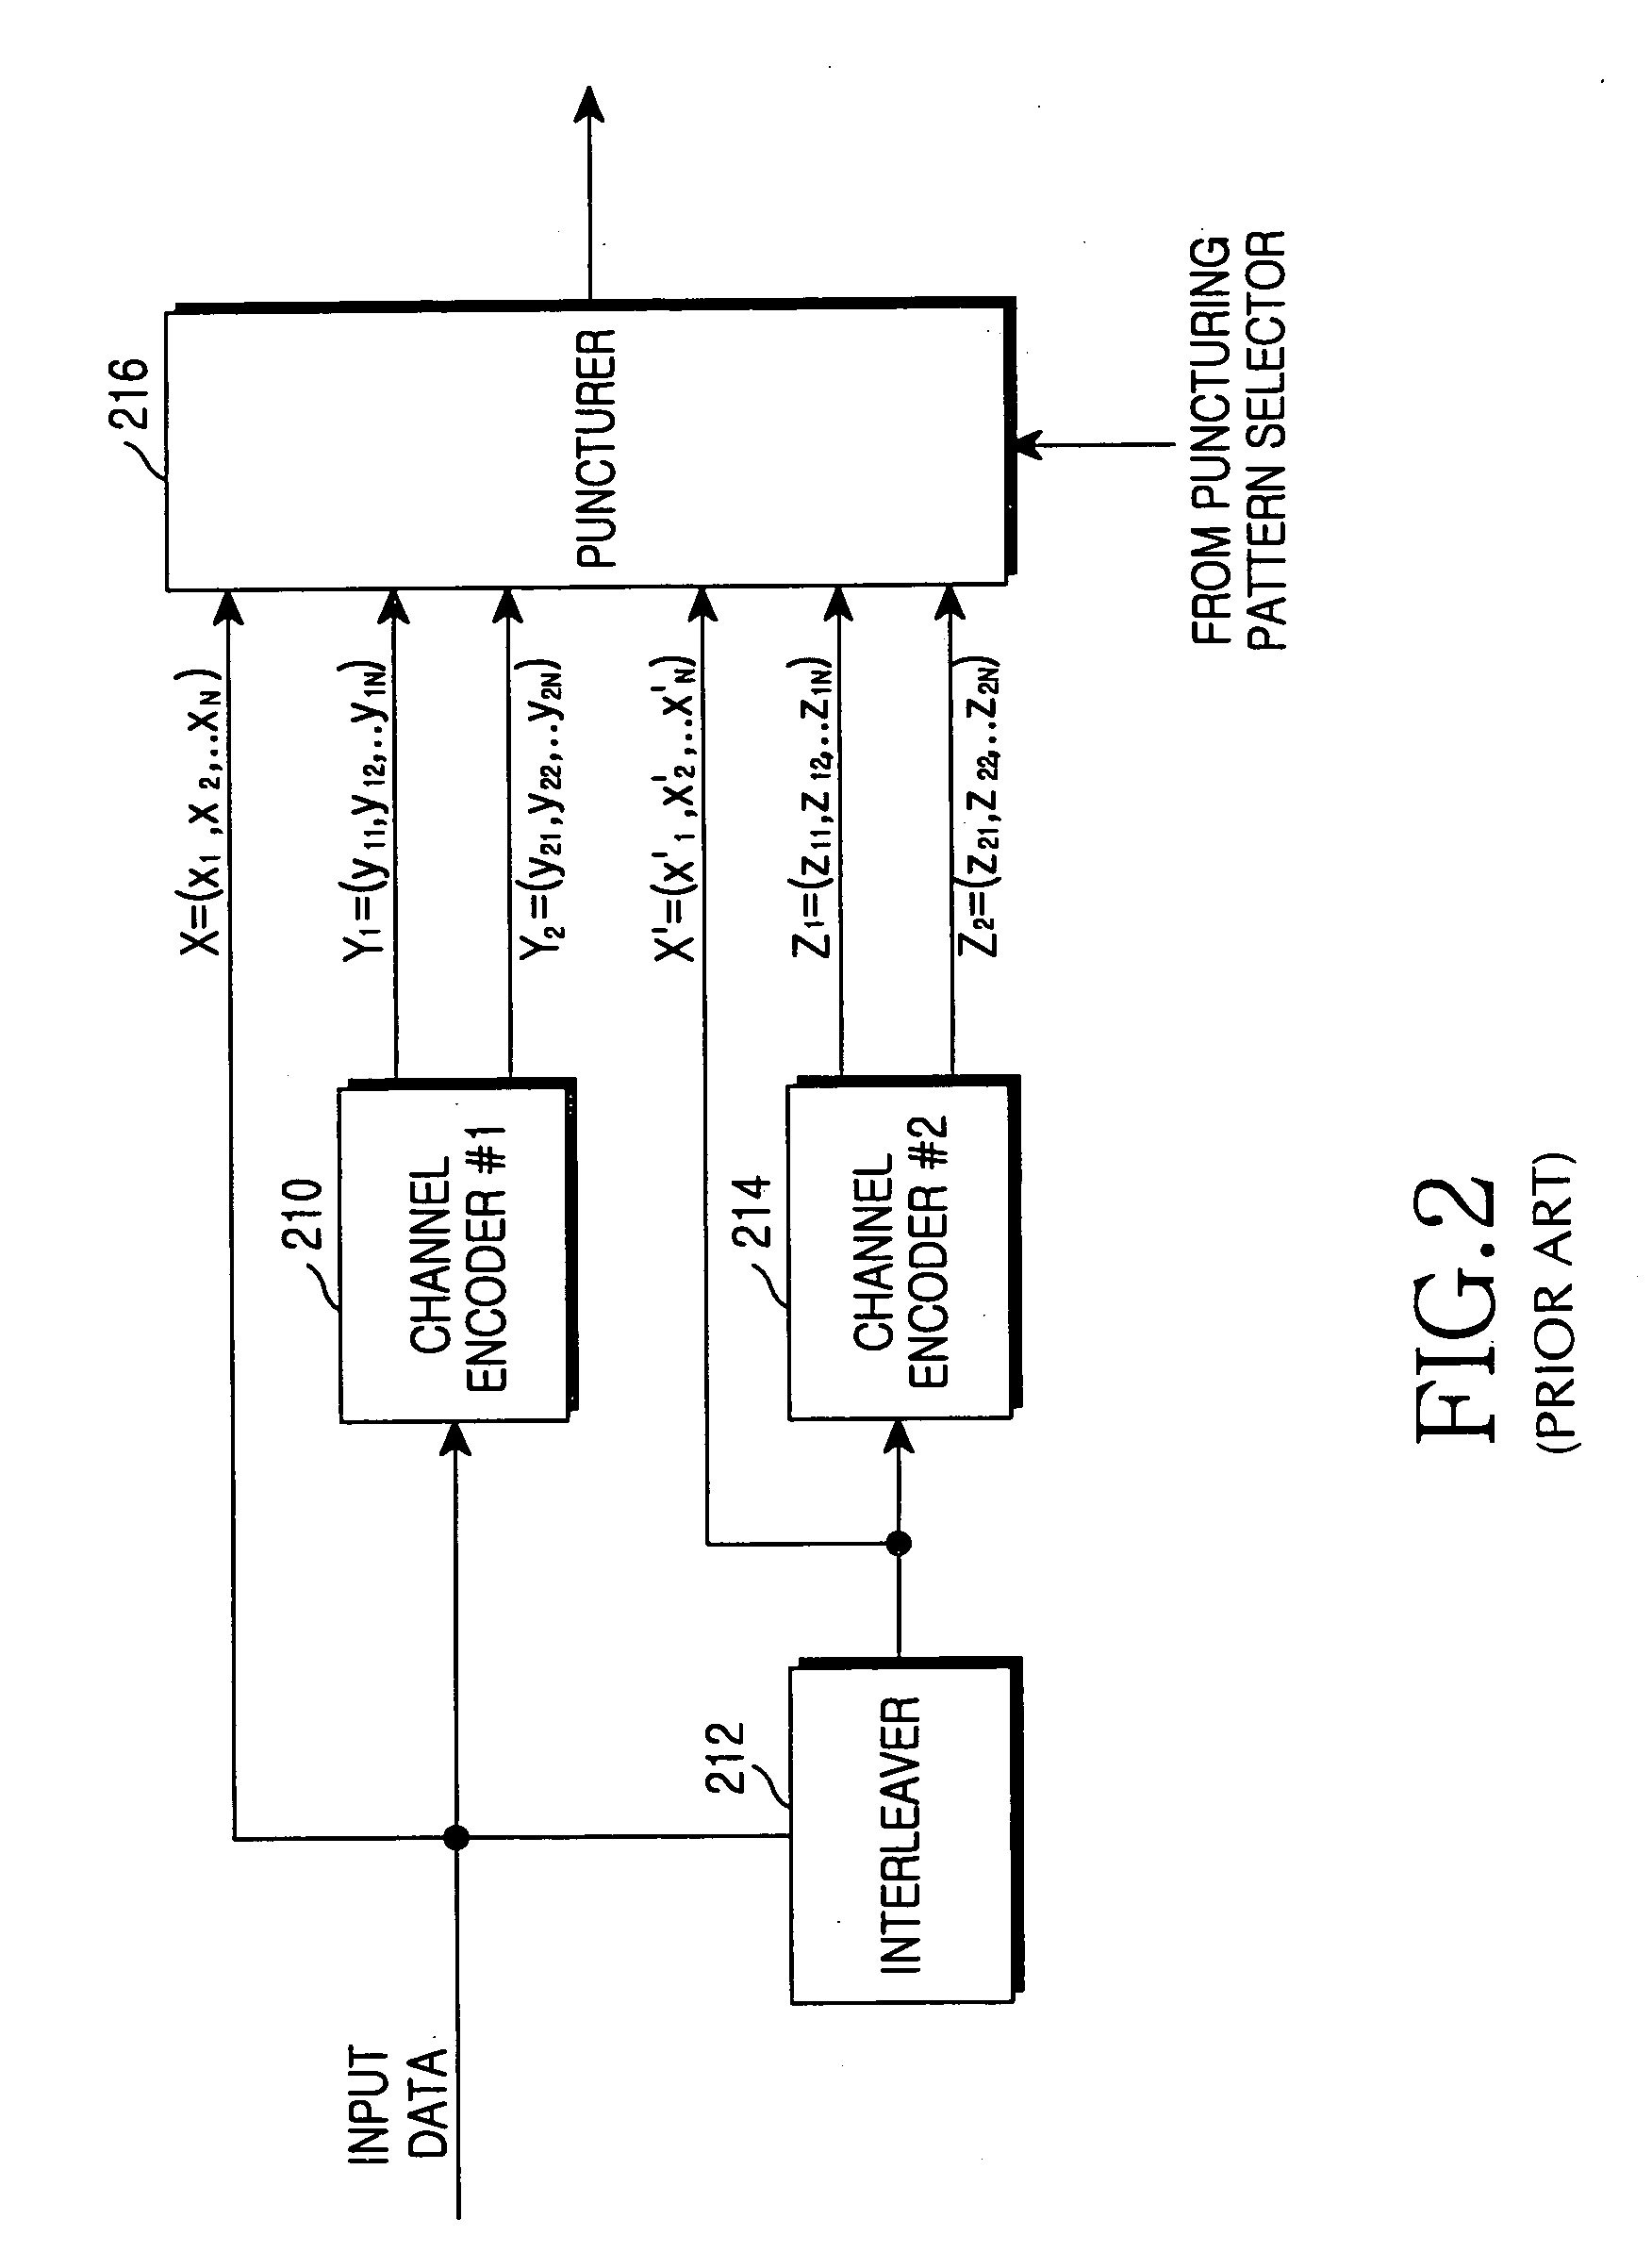 Transceiver apparatus and method for efficient high-speed data retransmission and decoding in a CDMA mobile communication system